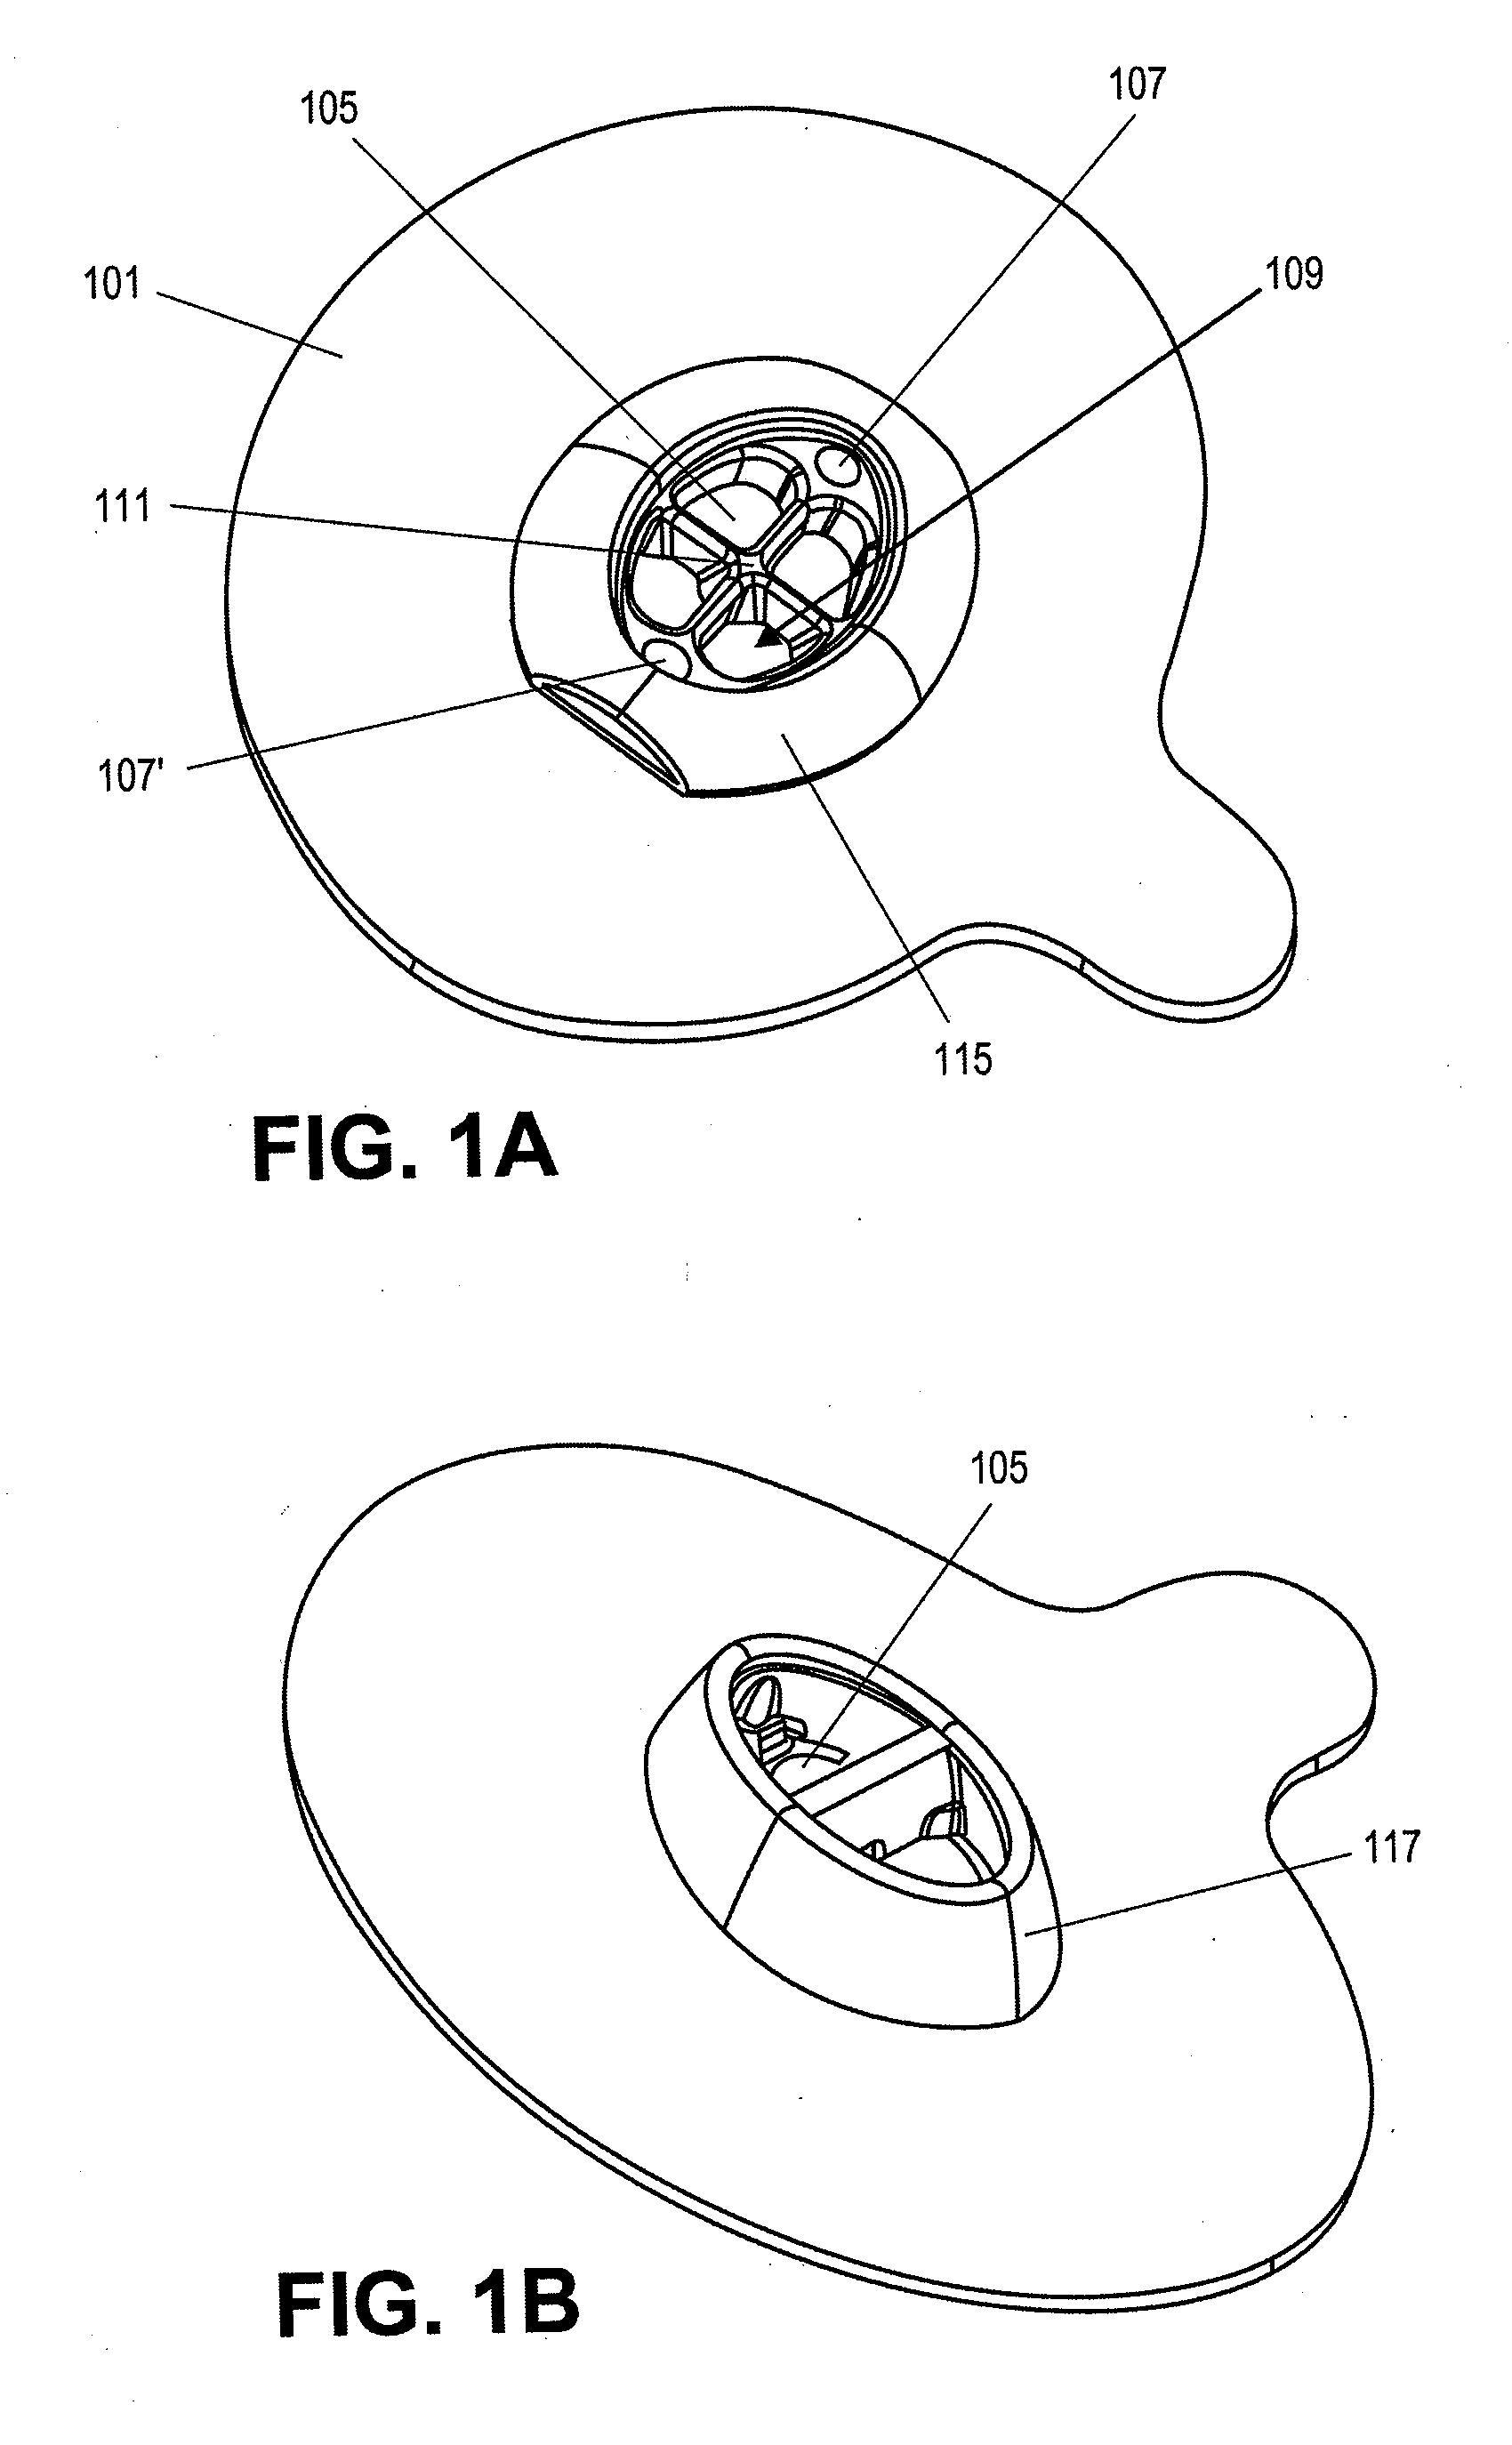 Respiratory sensor adapters for nasal devices